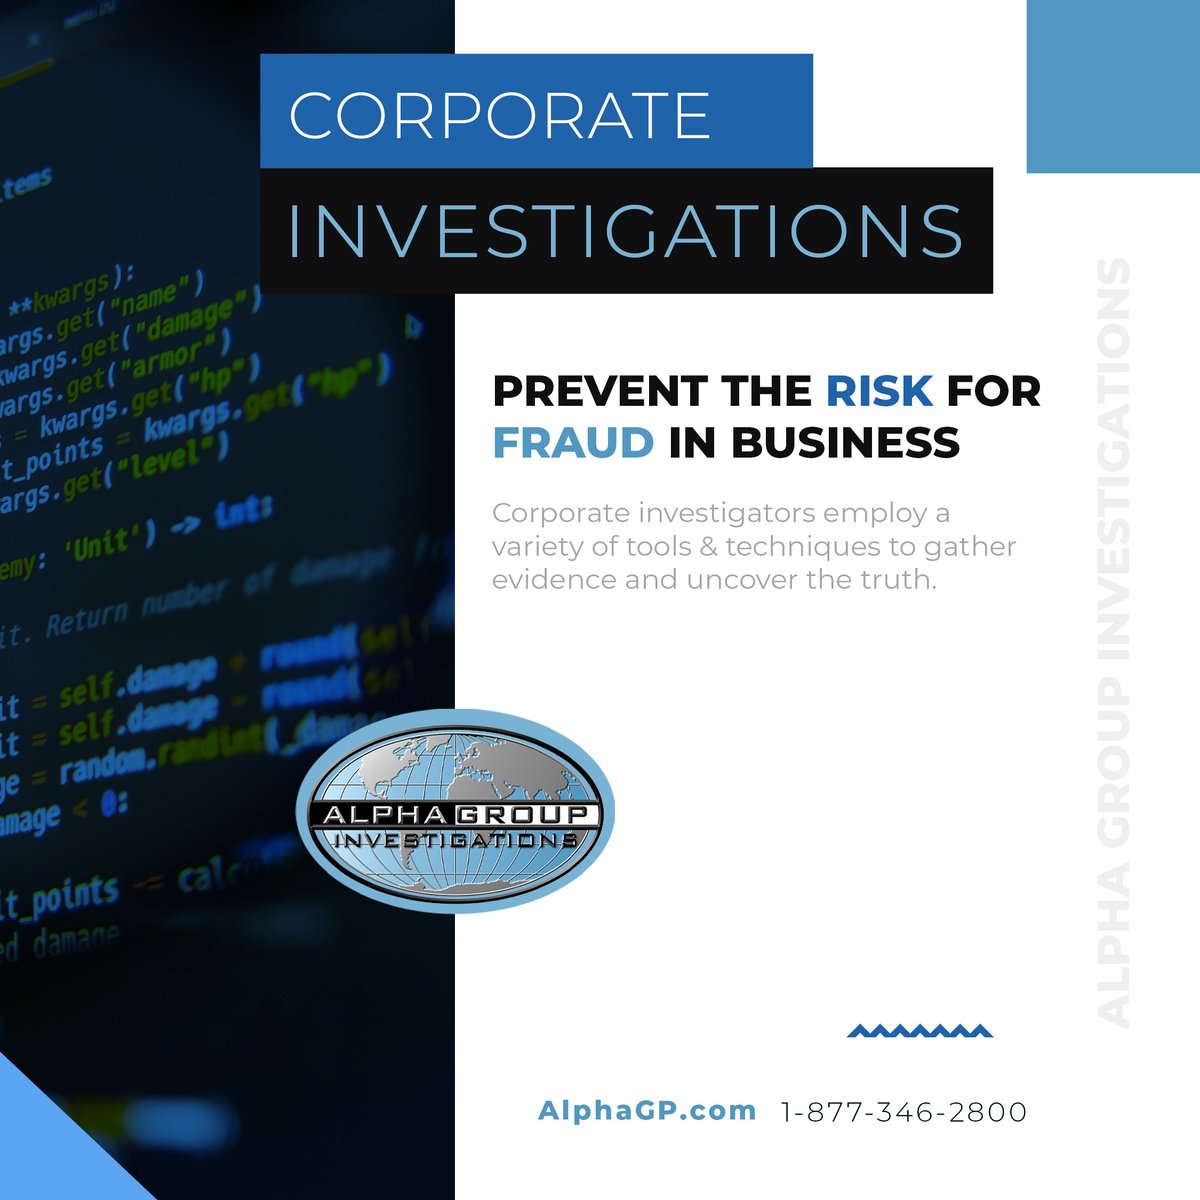 Corporate investigations employ a variety of tools & techniques to gather #evidence and uncover the #truth. Prevent the #riskoffraud in your #business. Visit AlphaGP.com  #CorporateInvestigations #FraudPrevention #BusinessSecurity #DueDiligence